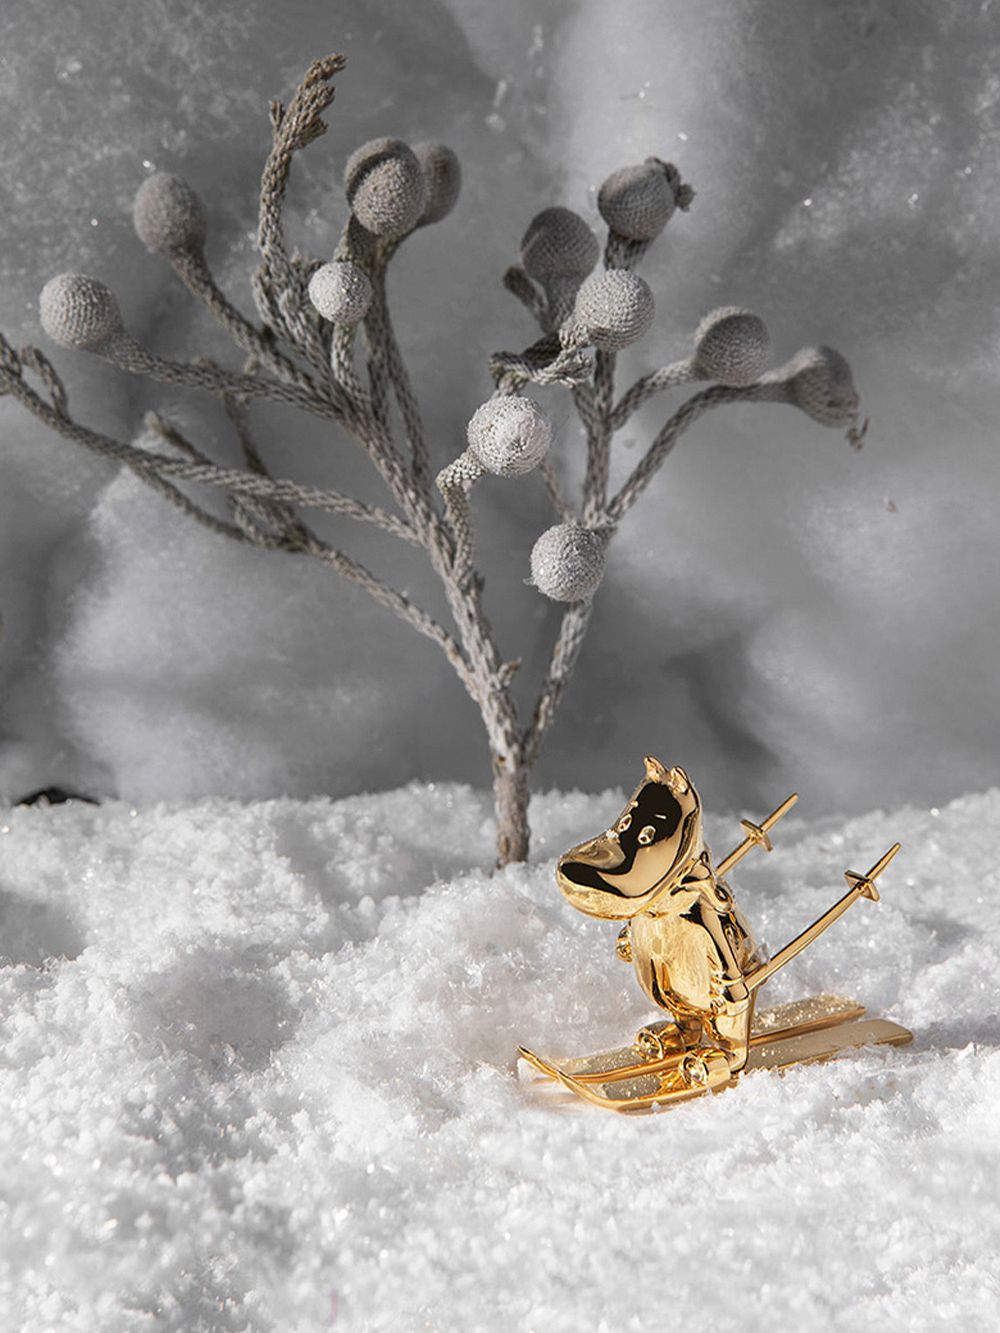 A gilded Moomintroll figurine with skis and sticks in a wintery landscape.